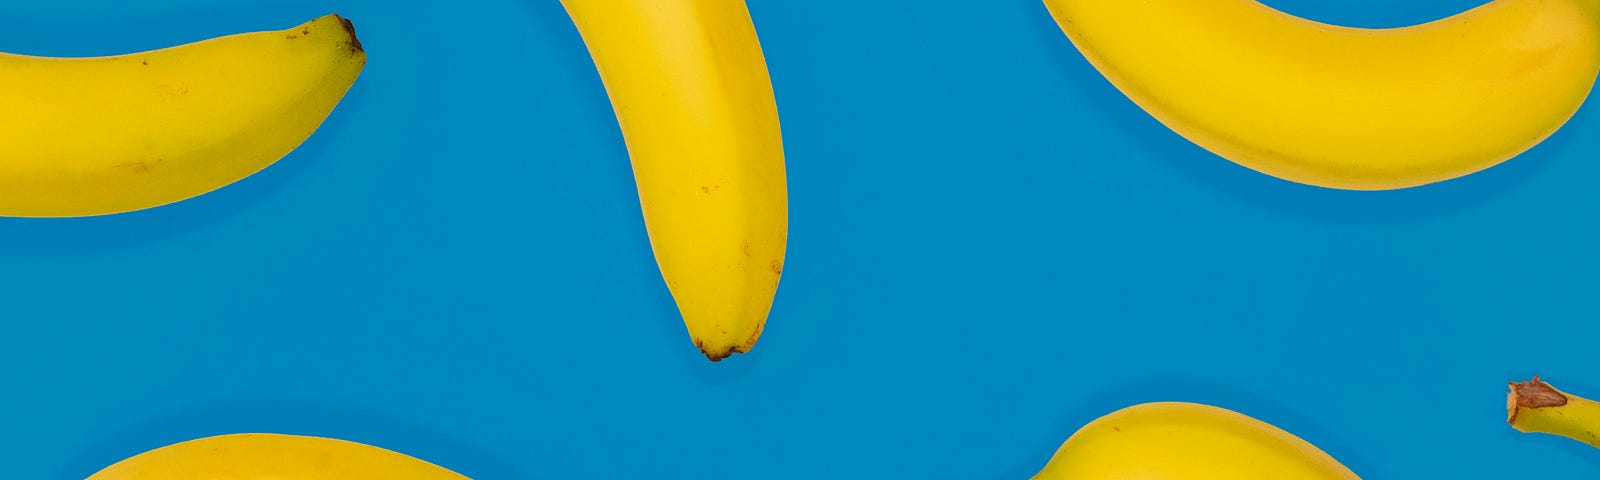 Blue background with many bananas spread around. It looks like they are falling from the sky.